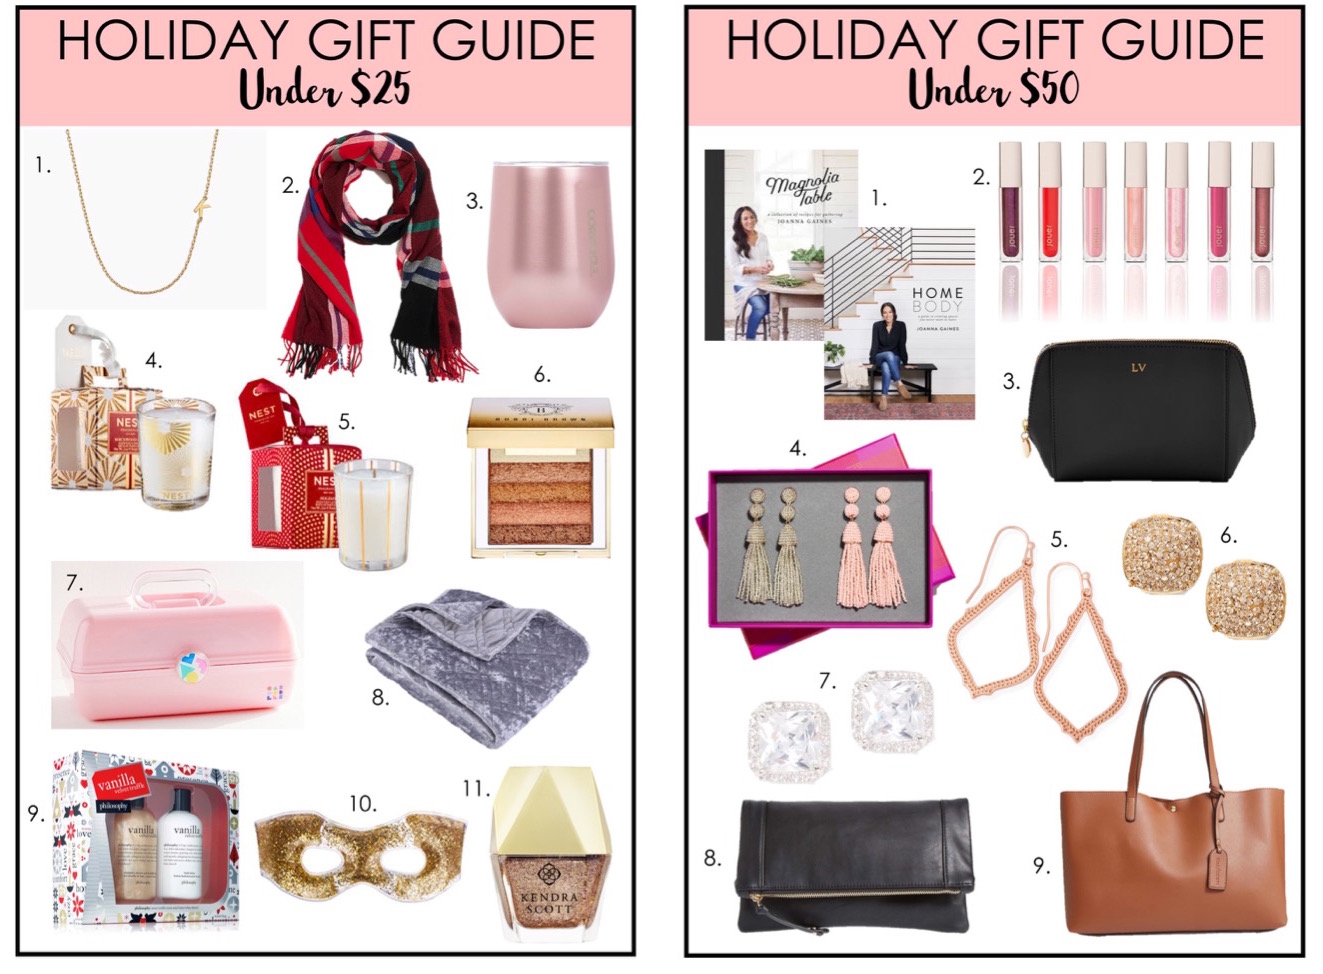 $25 and Under Gift Guide for Everyone - The Gracious Wife